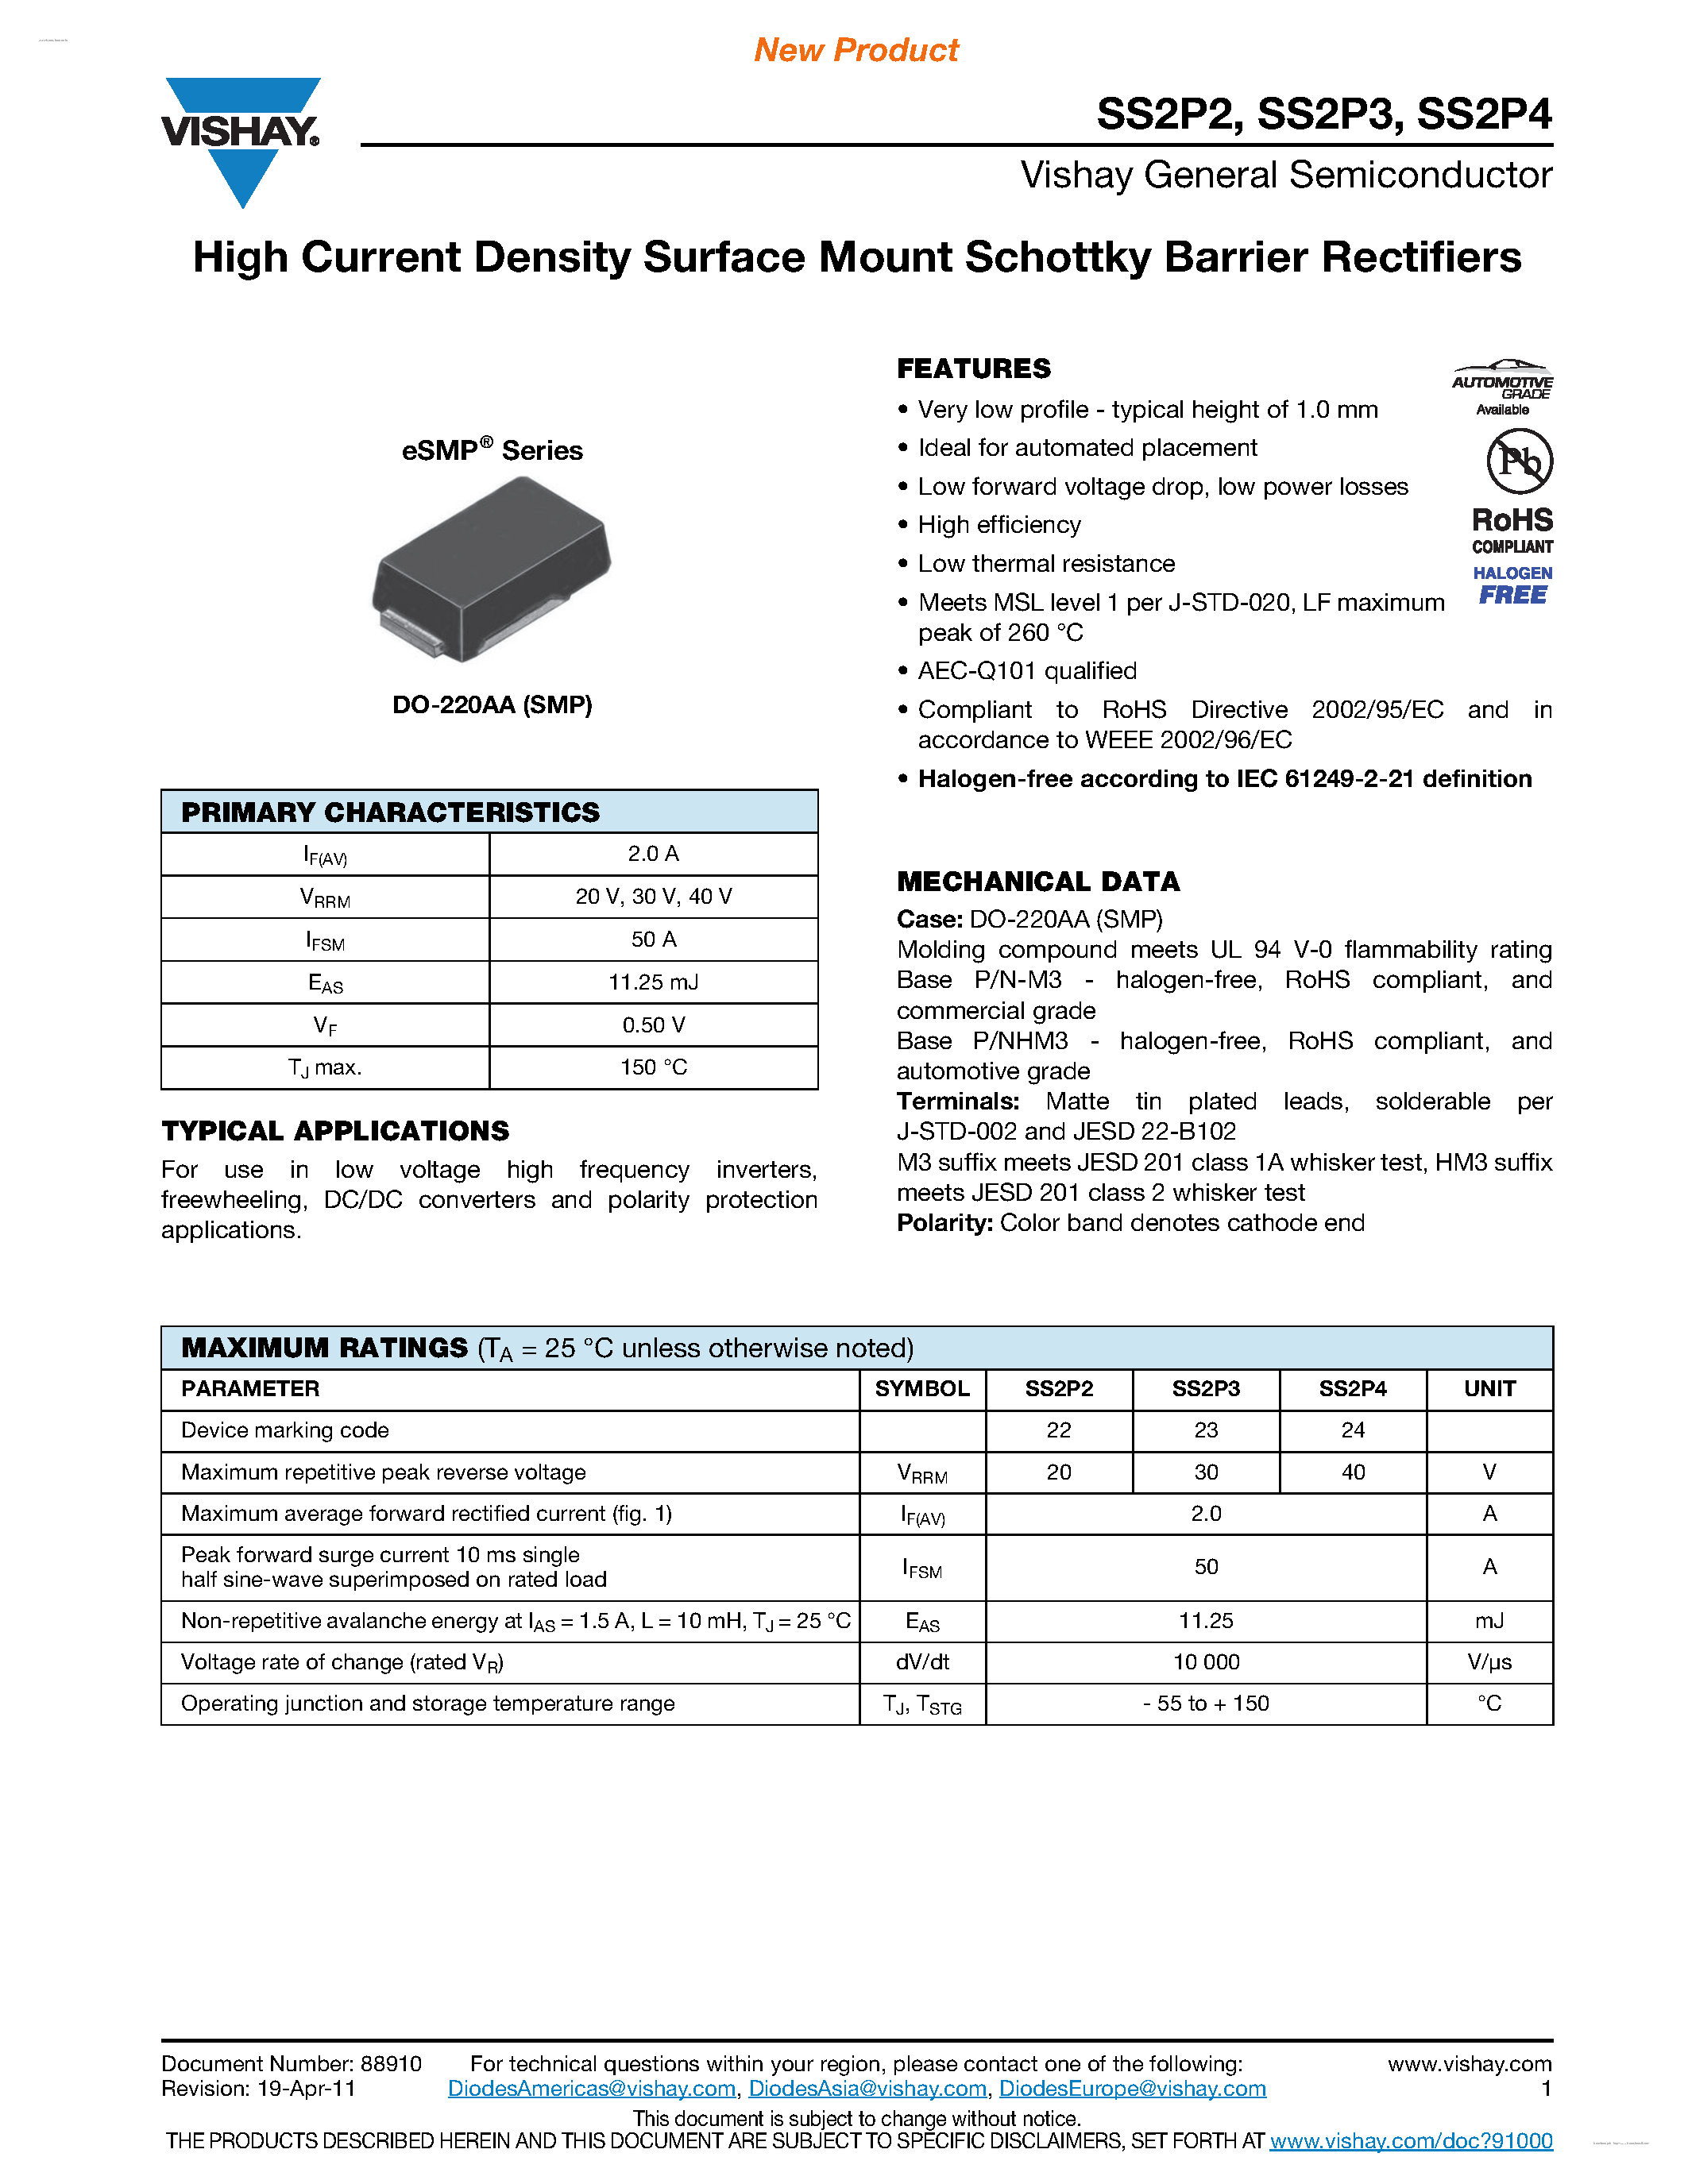 Даташит SS2P2 - (SS2P2 - SS2P4) High Current Density Surface Mount Schottky Barrier Rectifiers страница 1